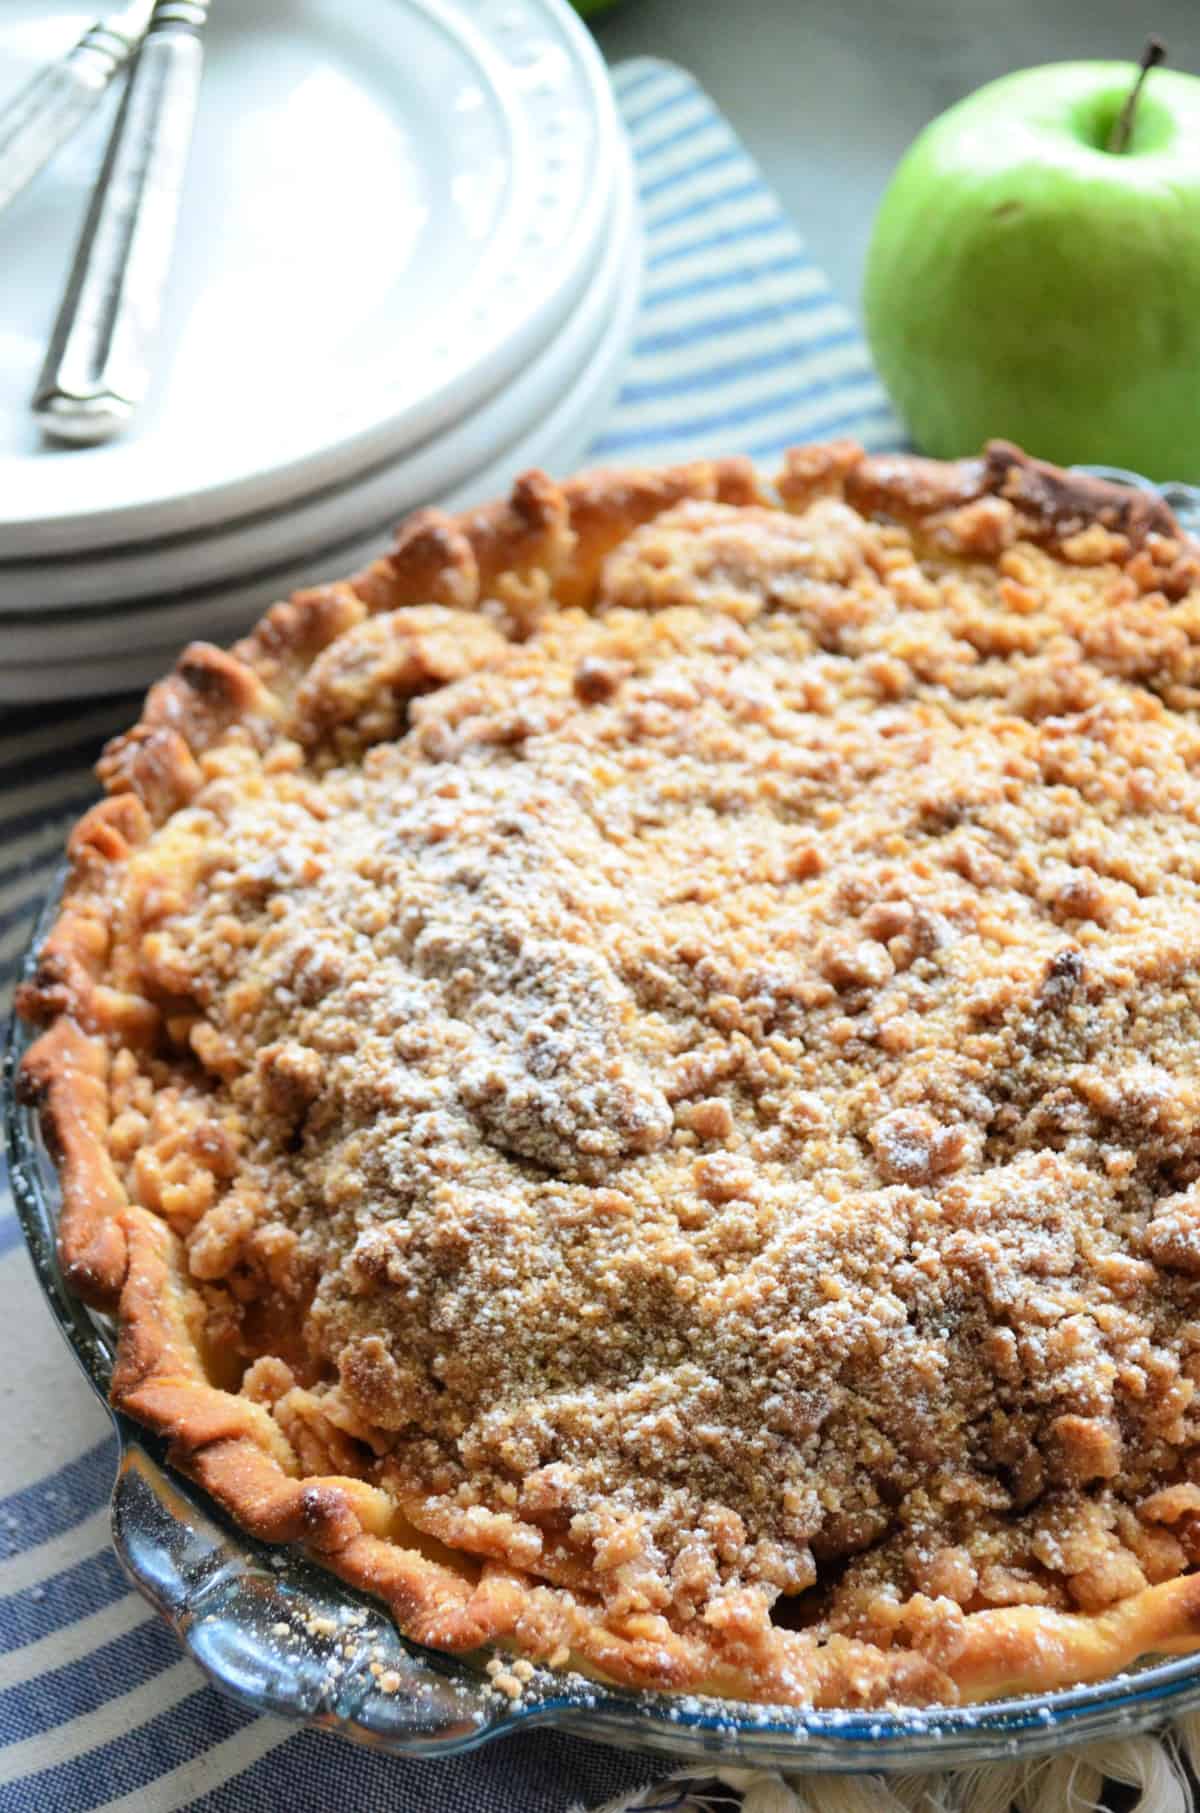 Pie with golden-brown crust and crumble topping dusted in powdered-sugar in front of a green apple.